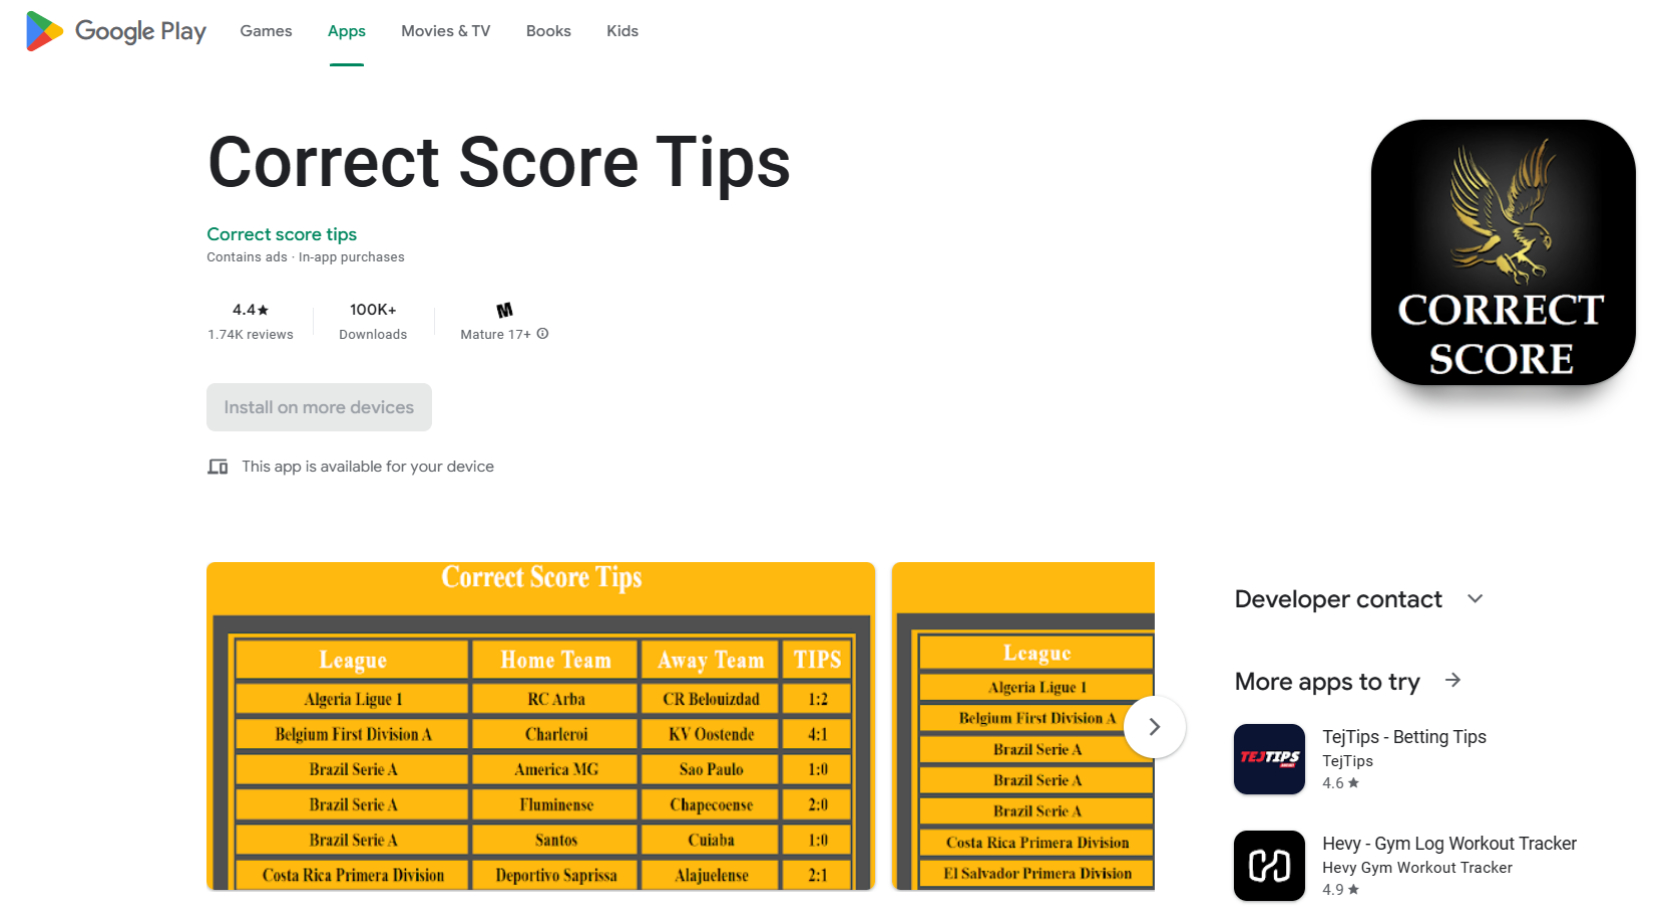 Image of Correct Score Tips app page